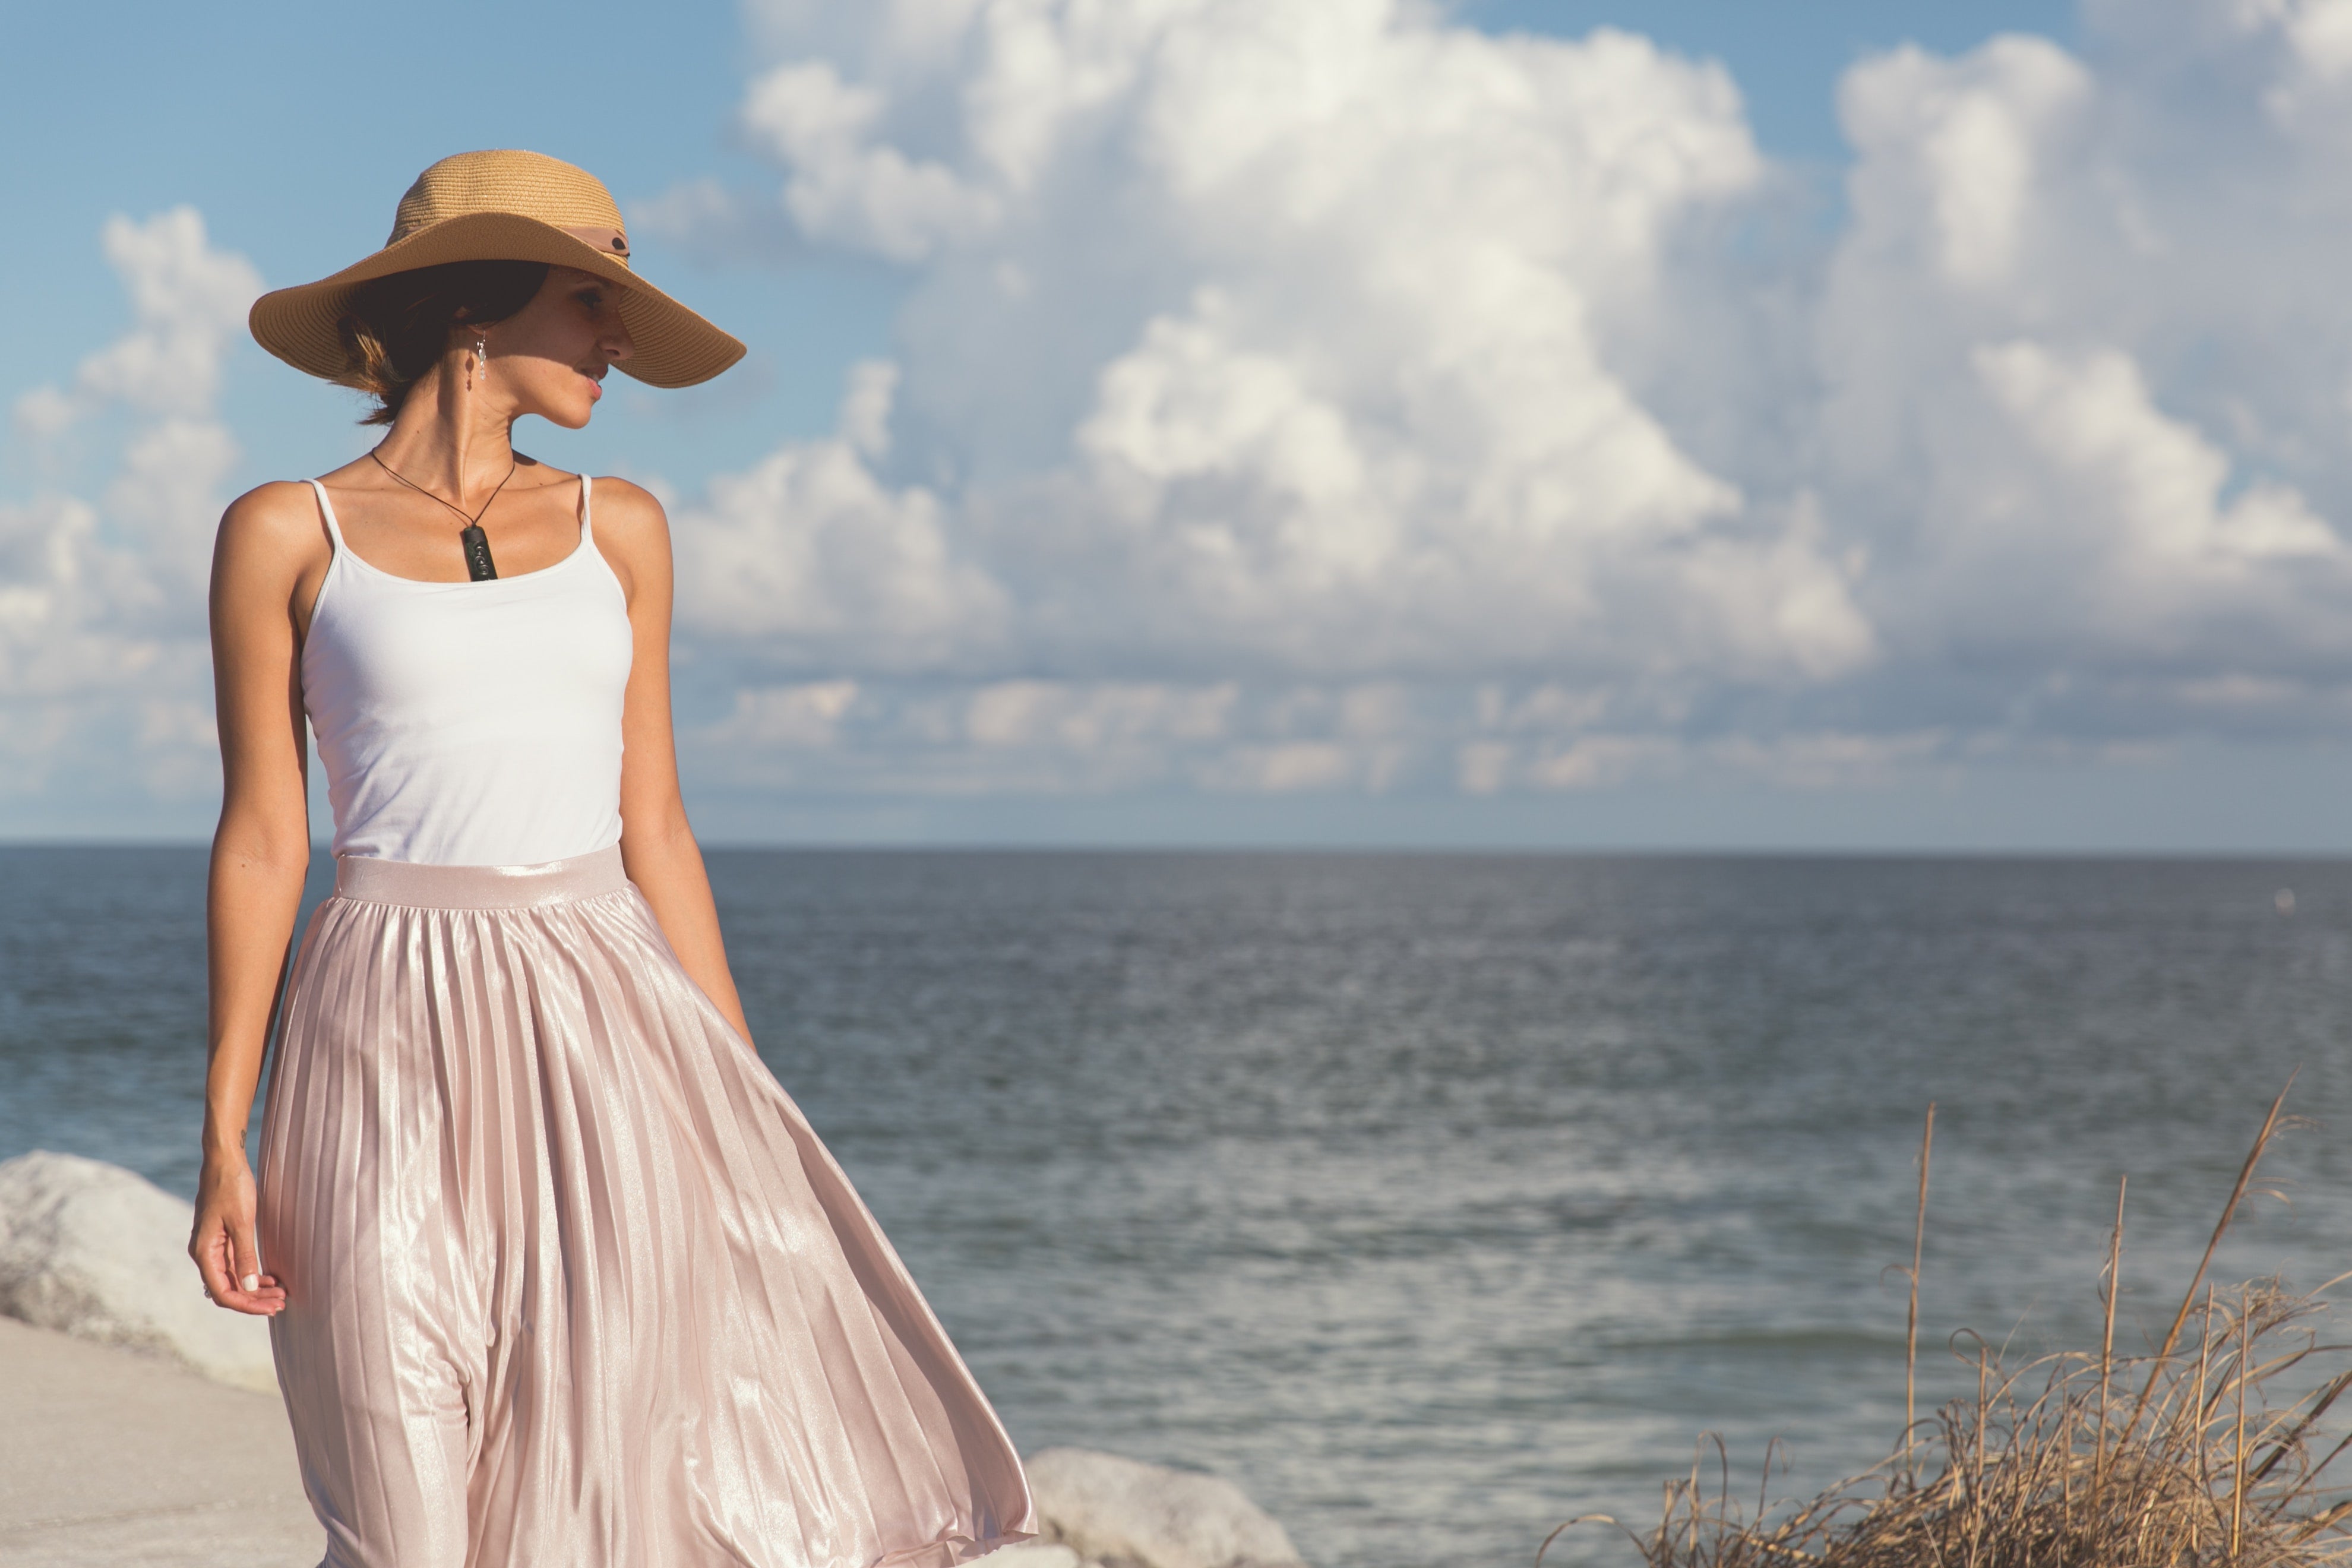 woman wearing a classic skirt and hat by the ocean